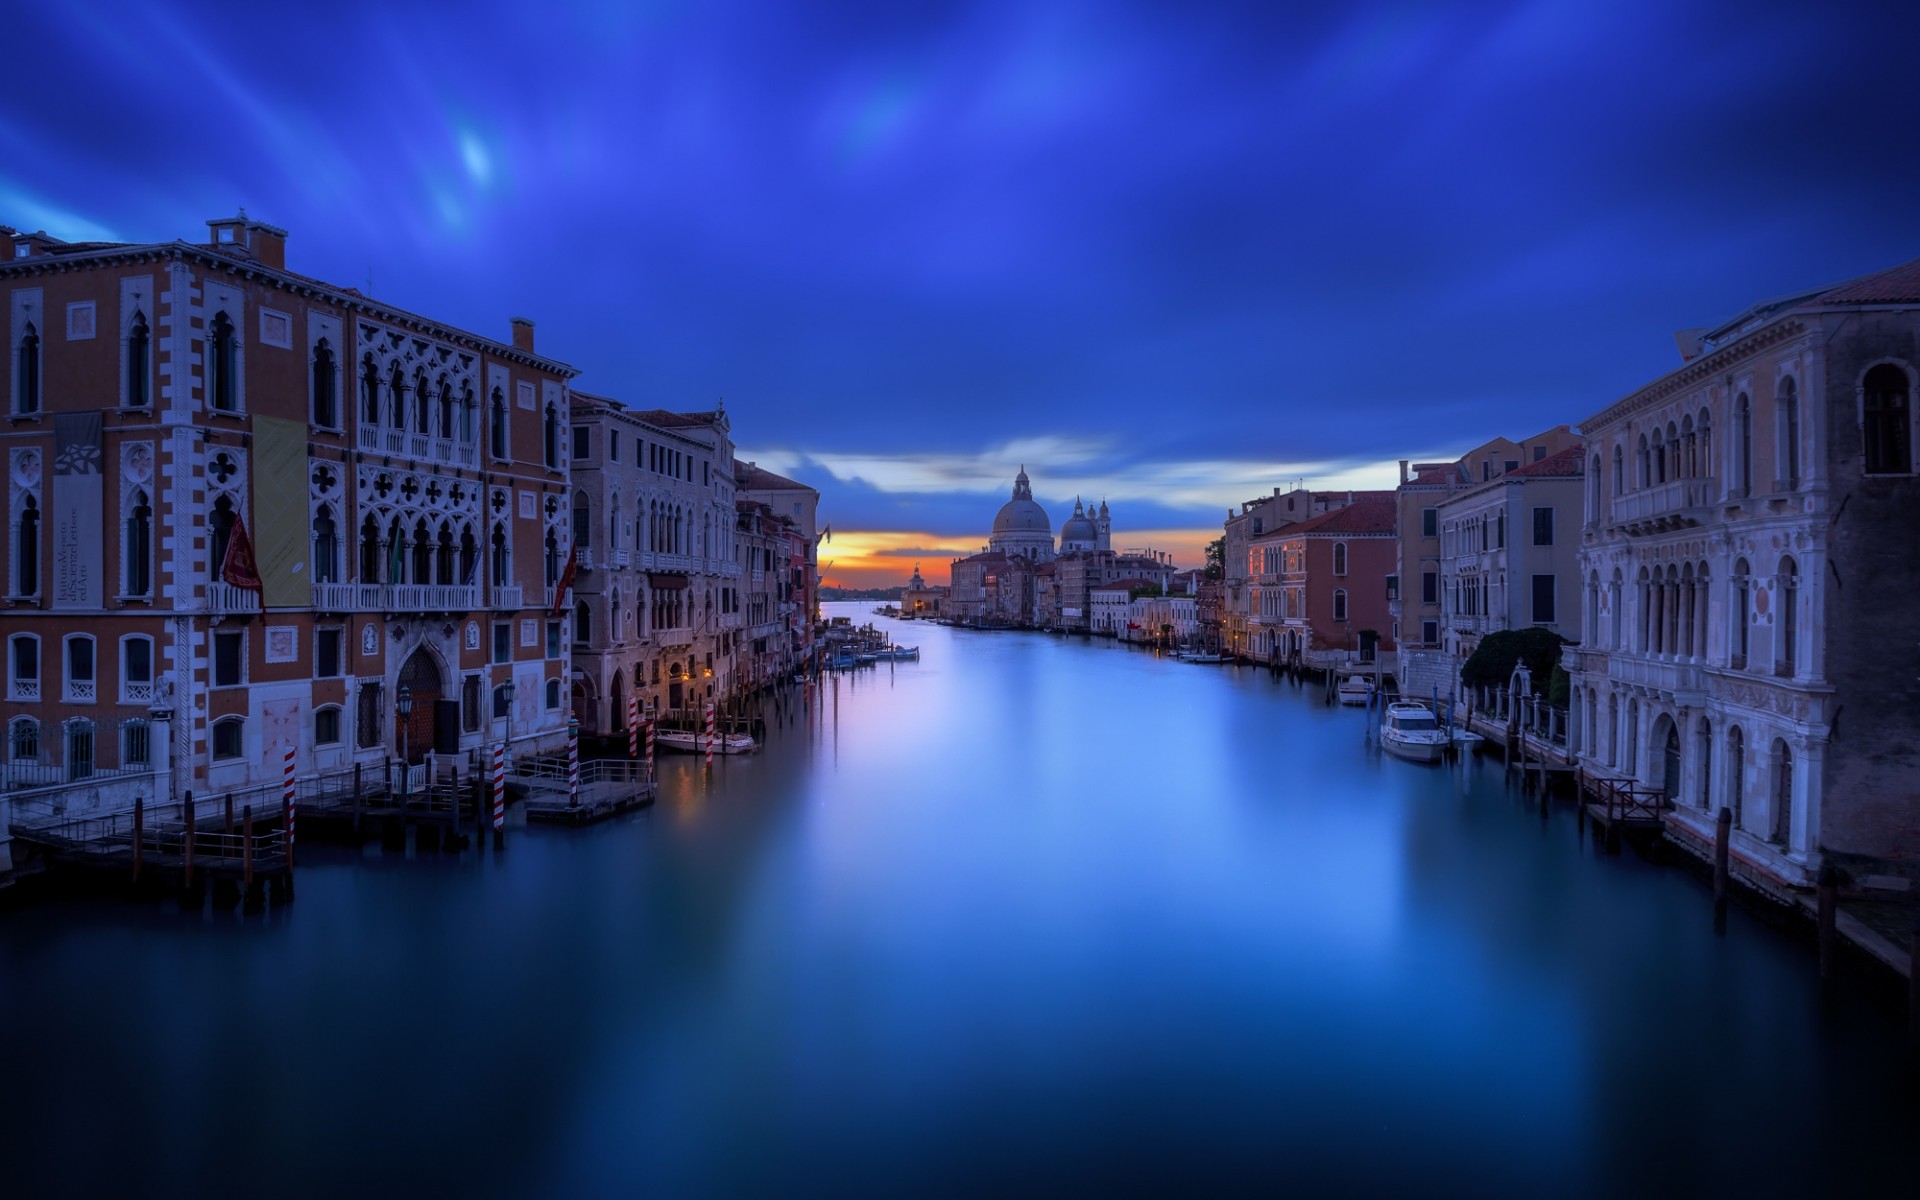 man made, venice, architecture, building, dusk, grand canal, cities